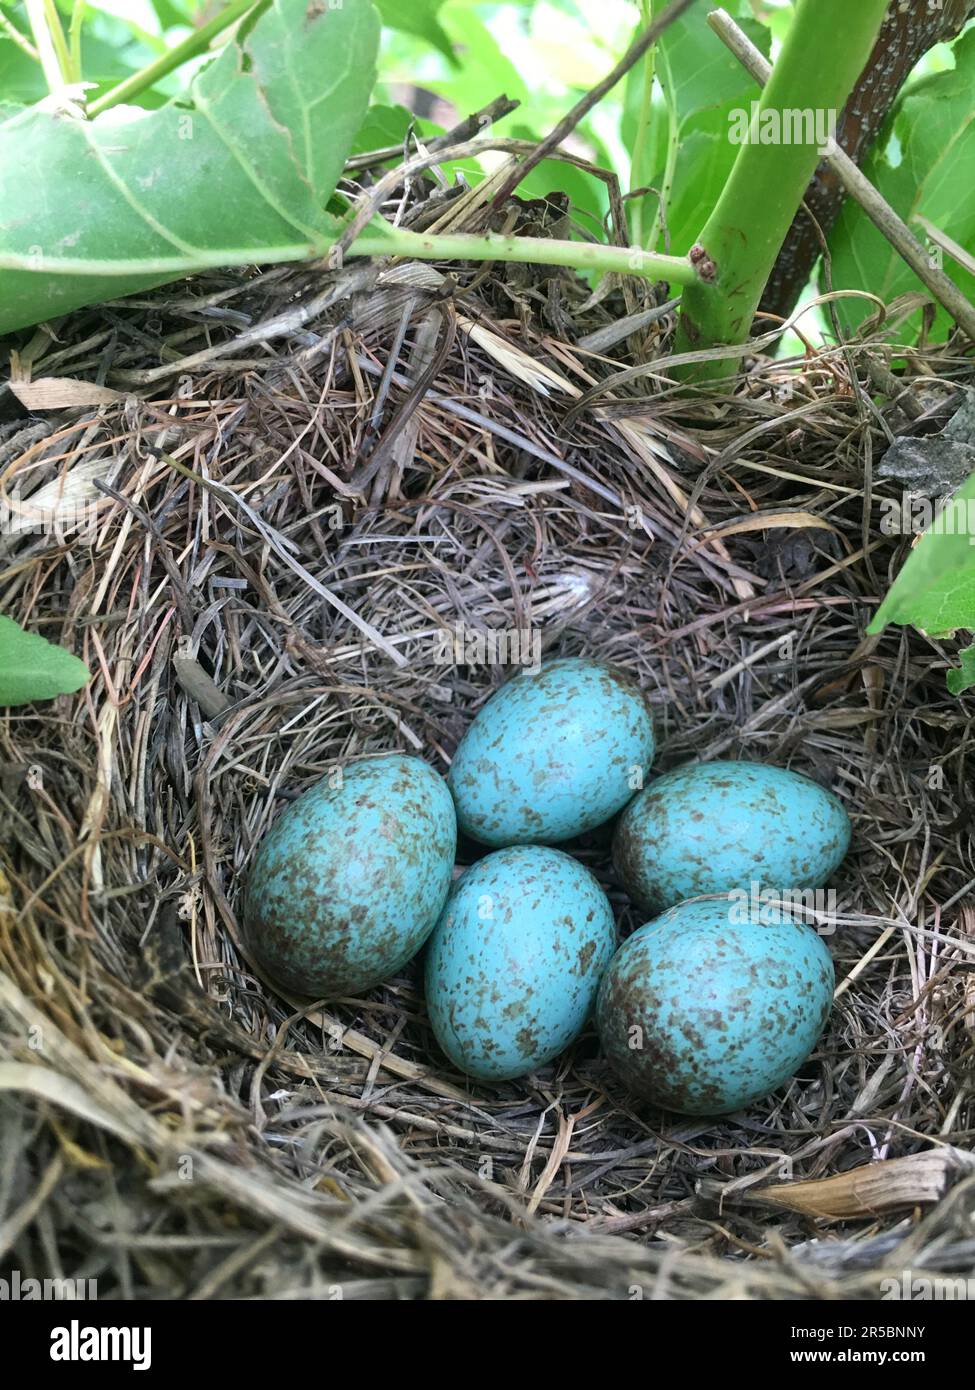 Jays nest hi-res stock photography and images - Alamy